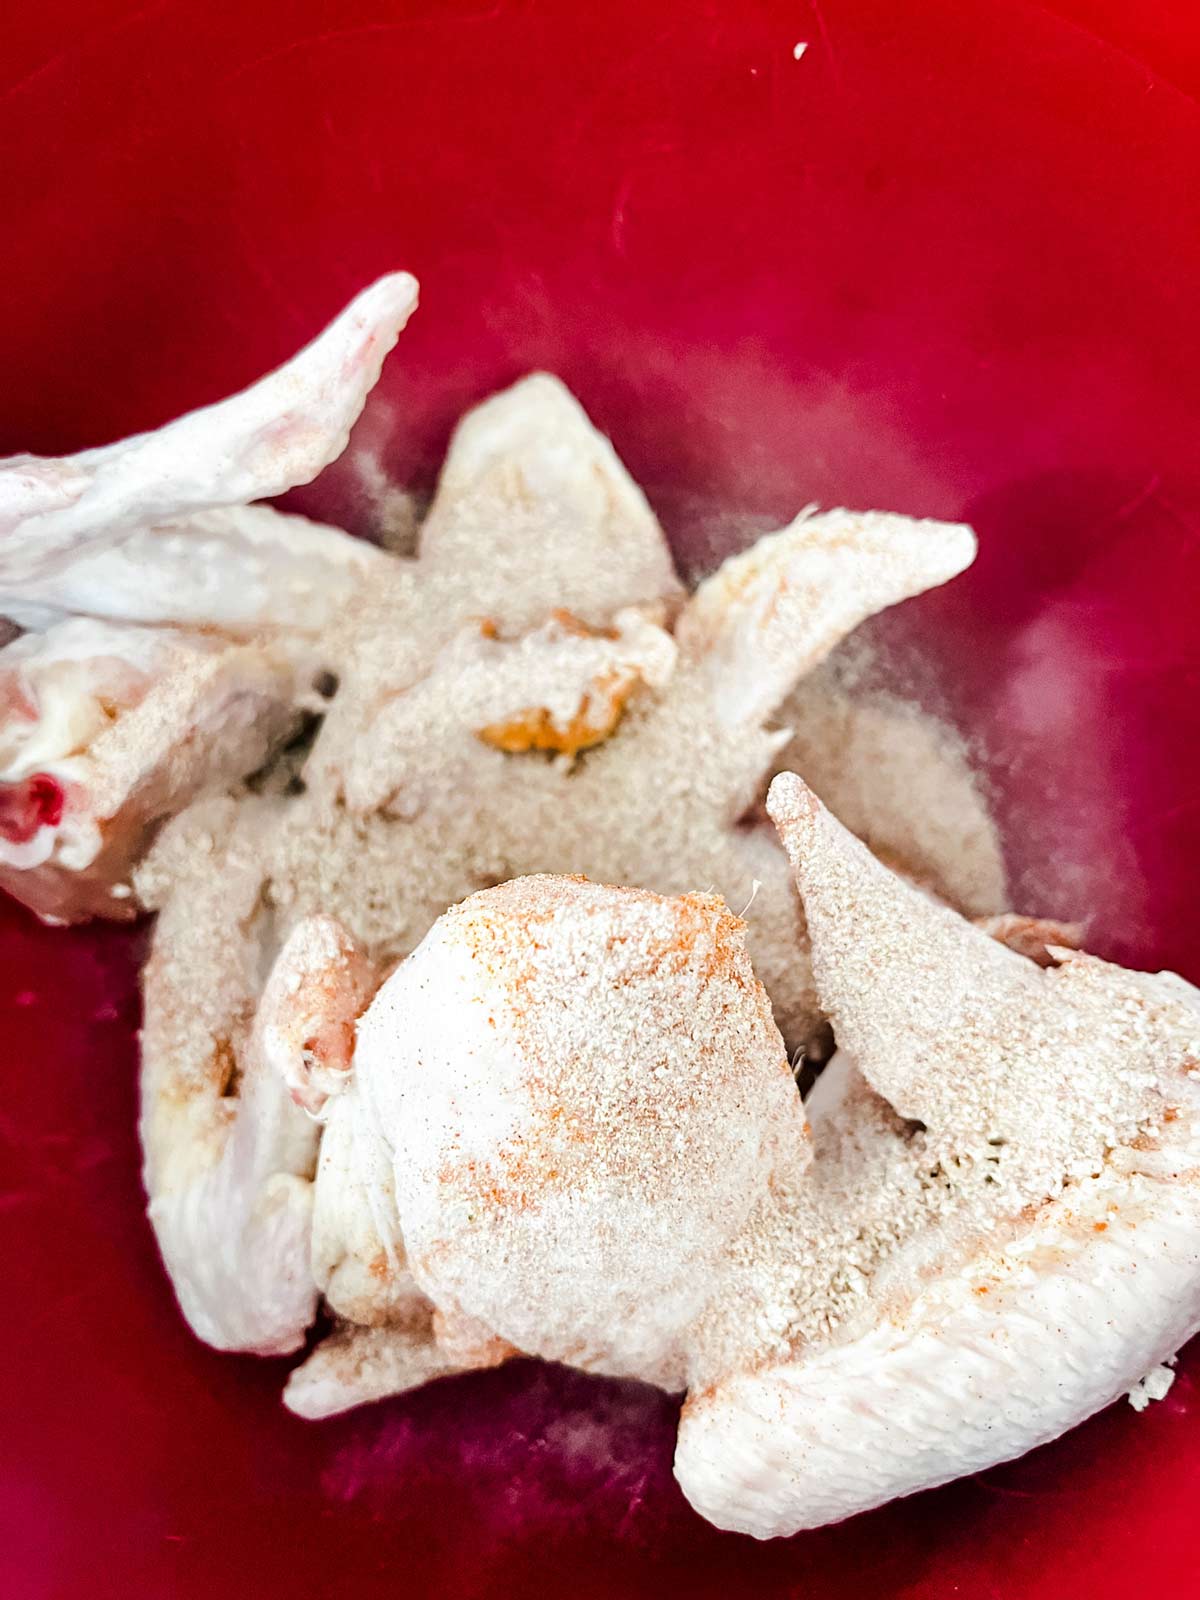 Seasonings poured over chicken wings in a red bowl.